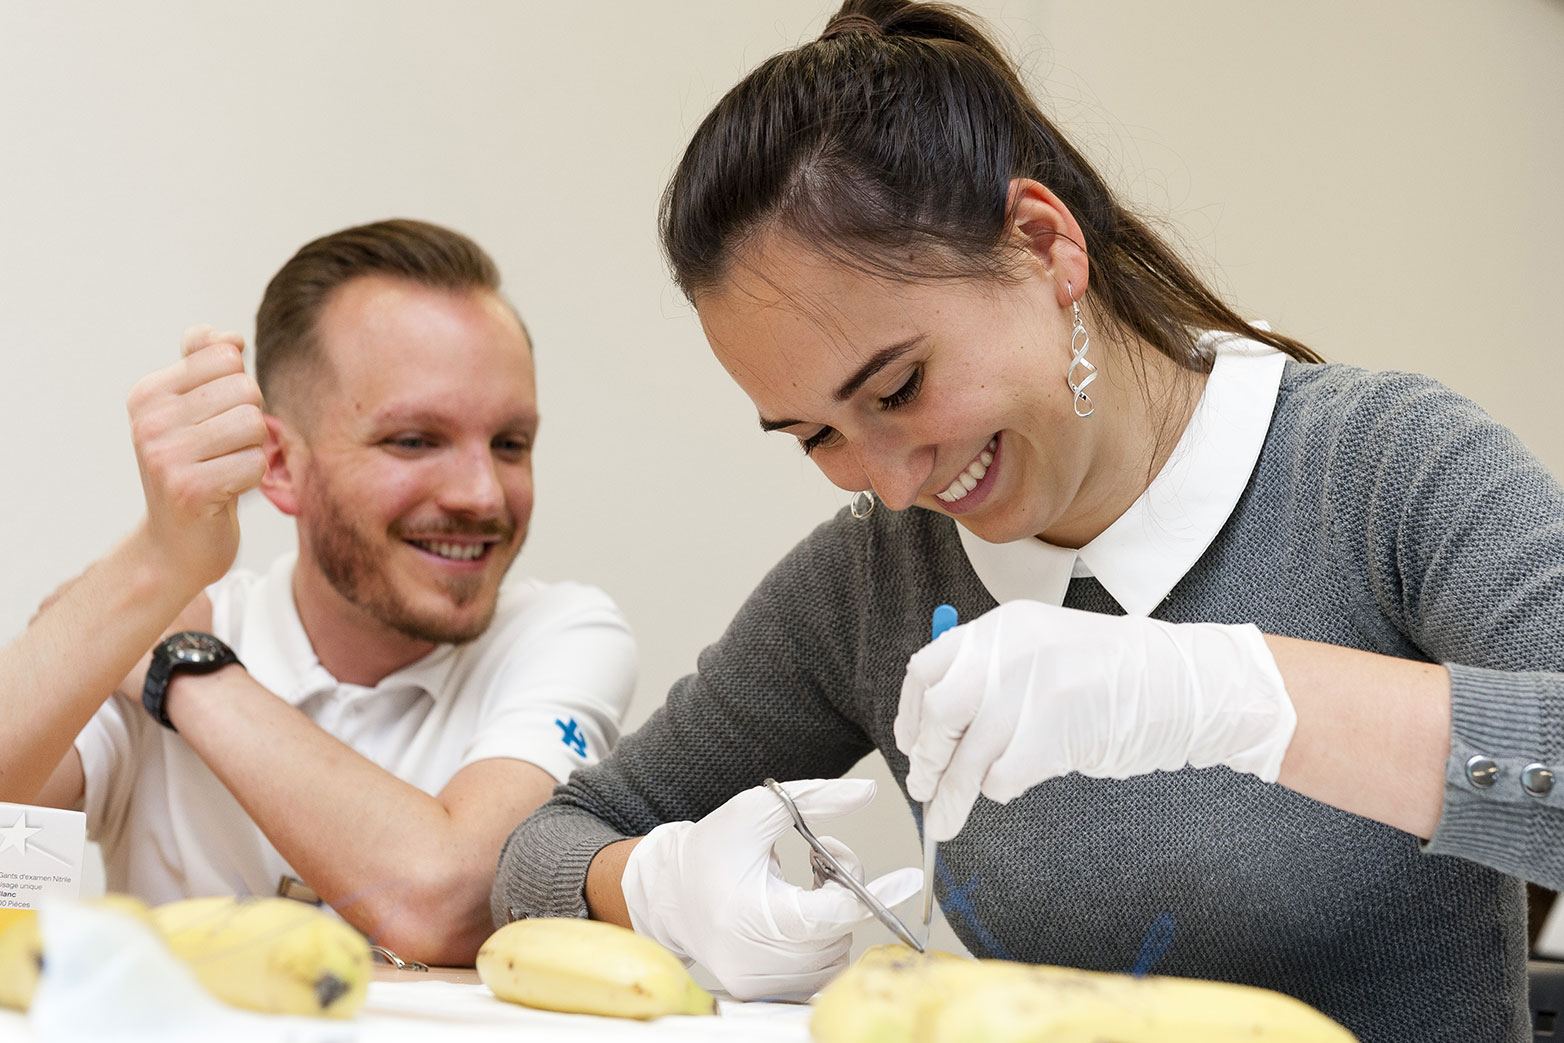 Enlarged view: Banana as a training object: as early as in the first week an ETH medical student learns to sew a wound.&nbsp;(Image: Patt Wettschein, www.photoproduction.ch)